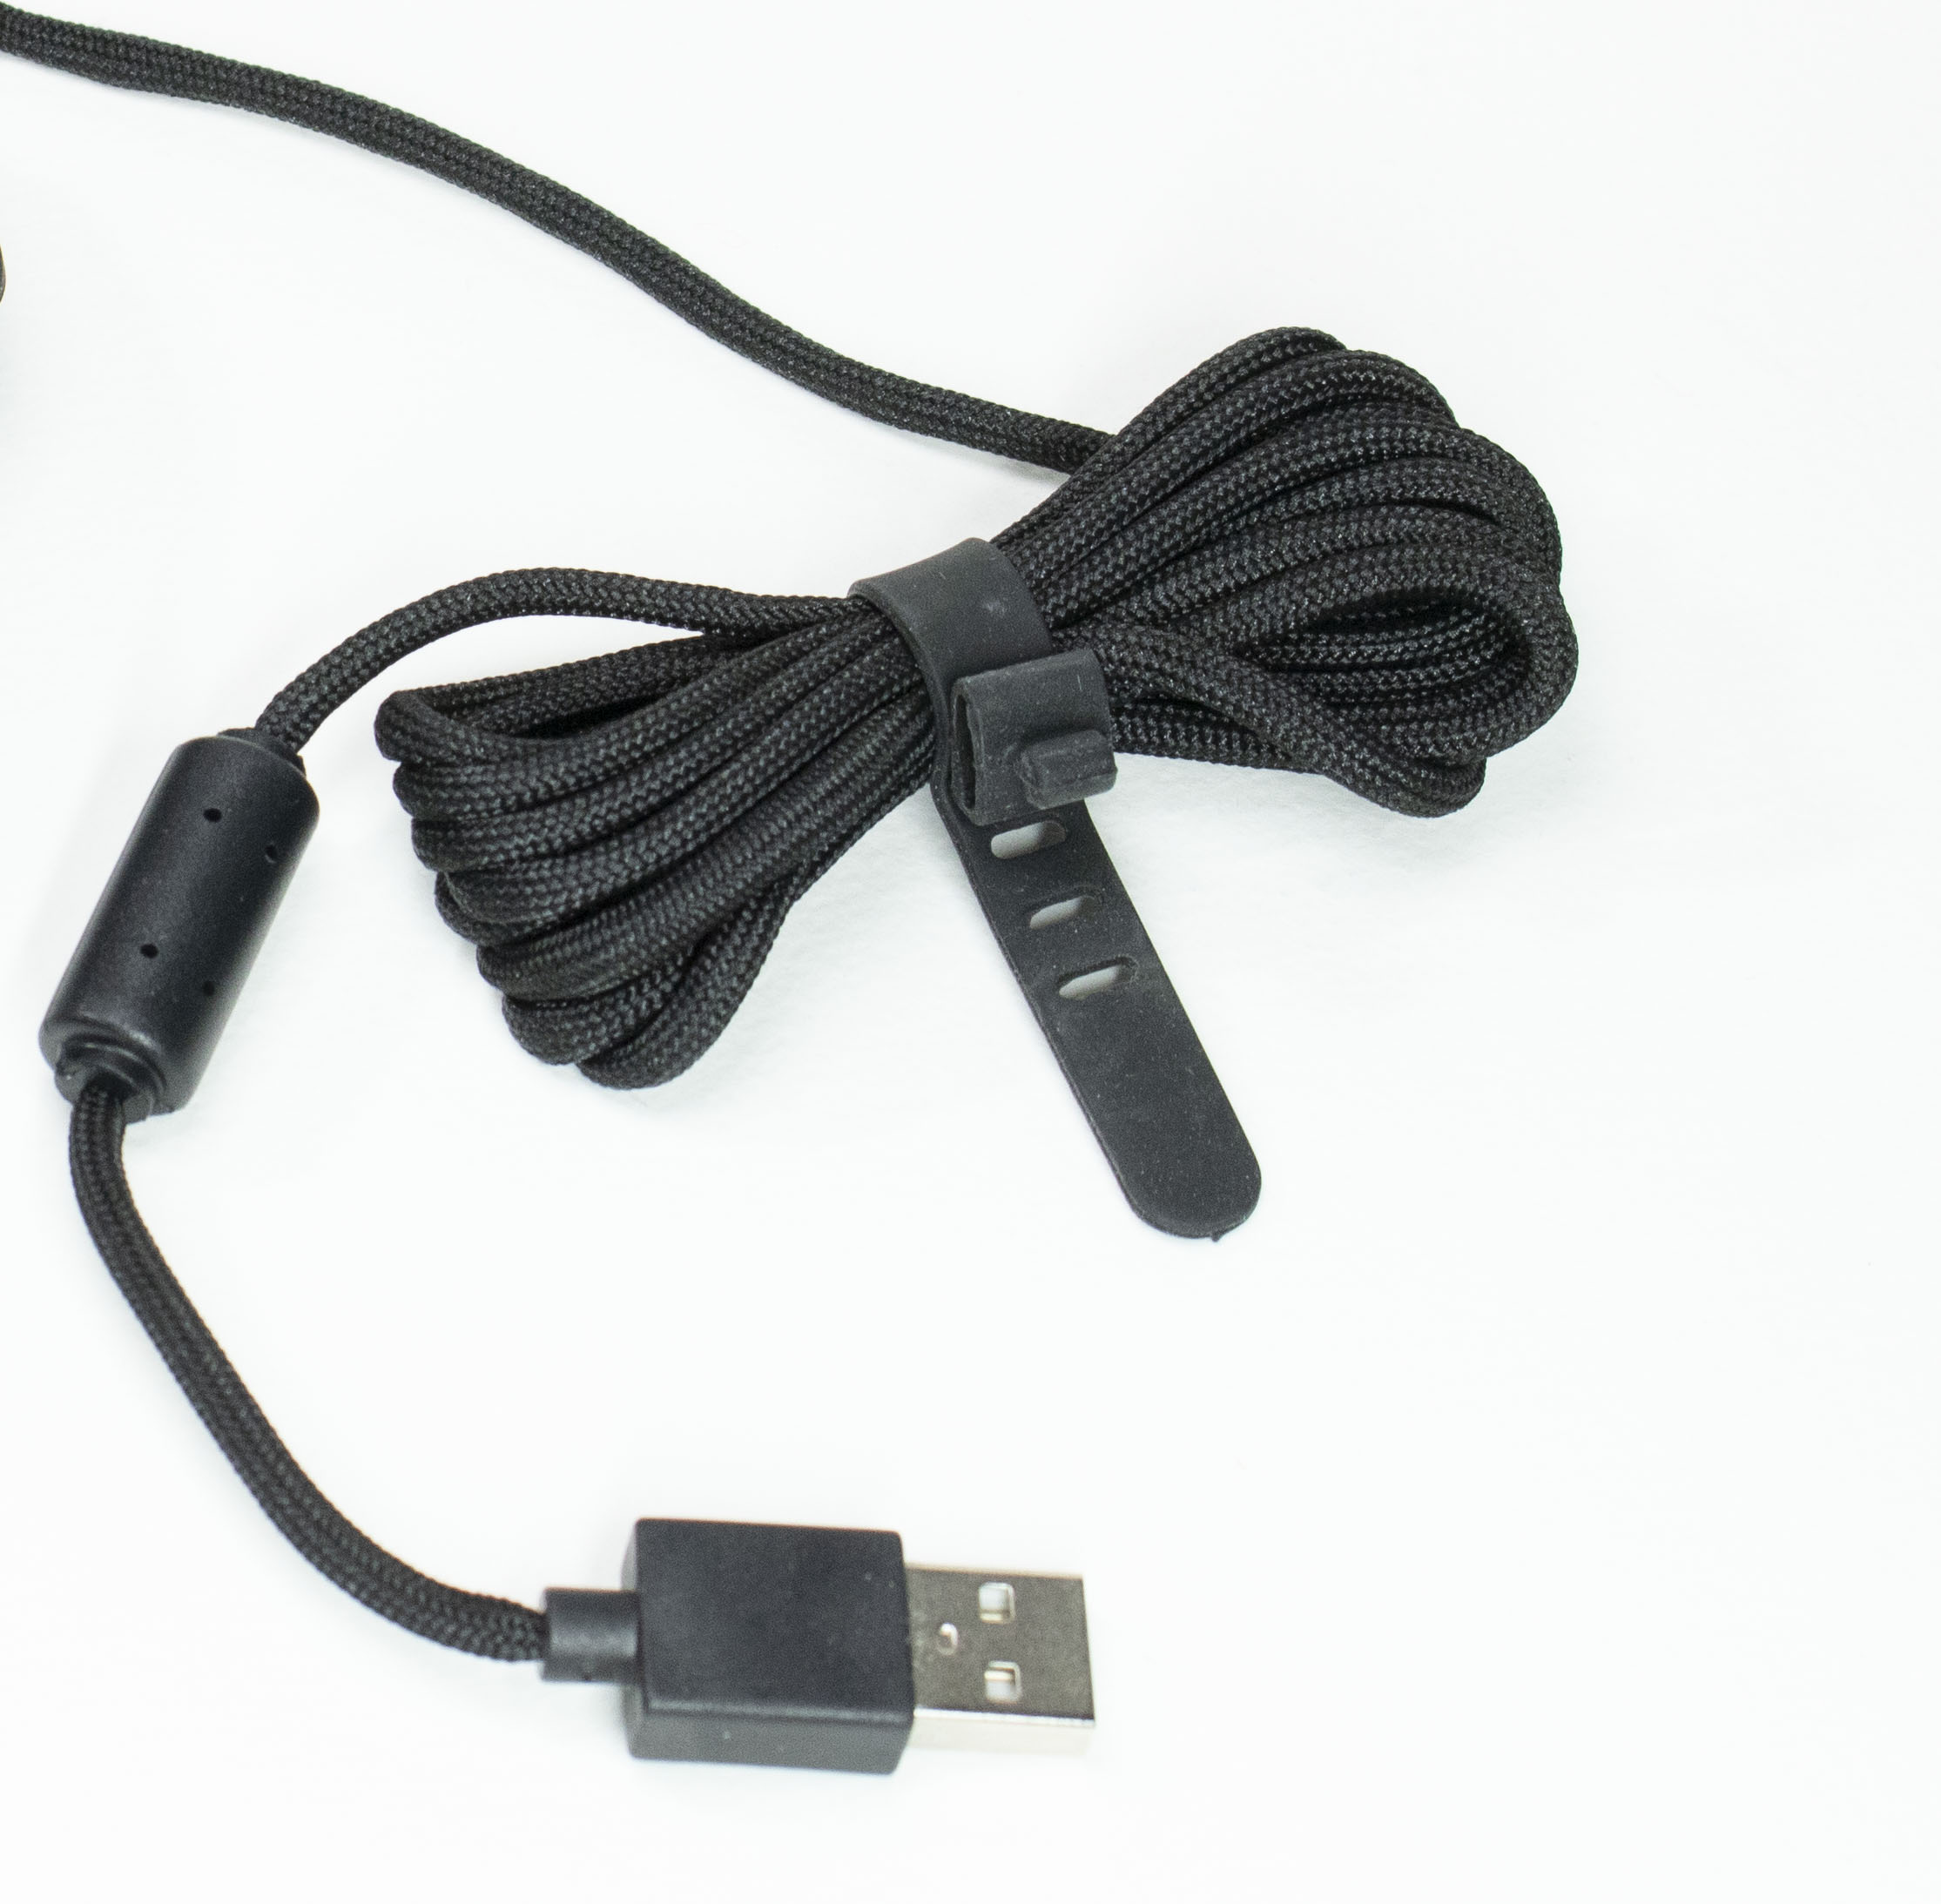 Close-up of the paracord cable